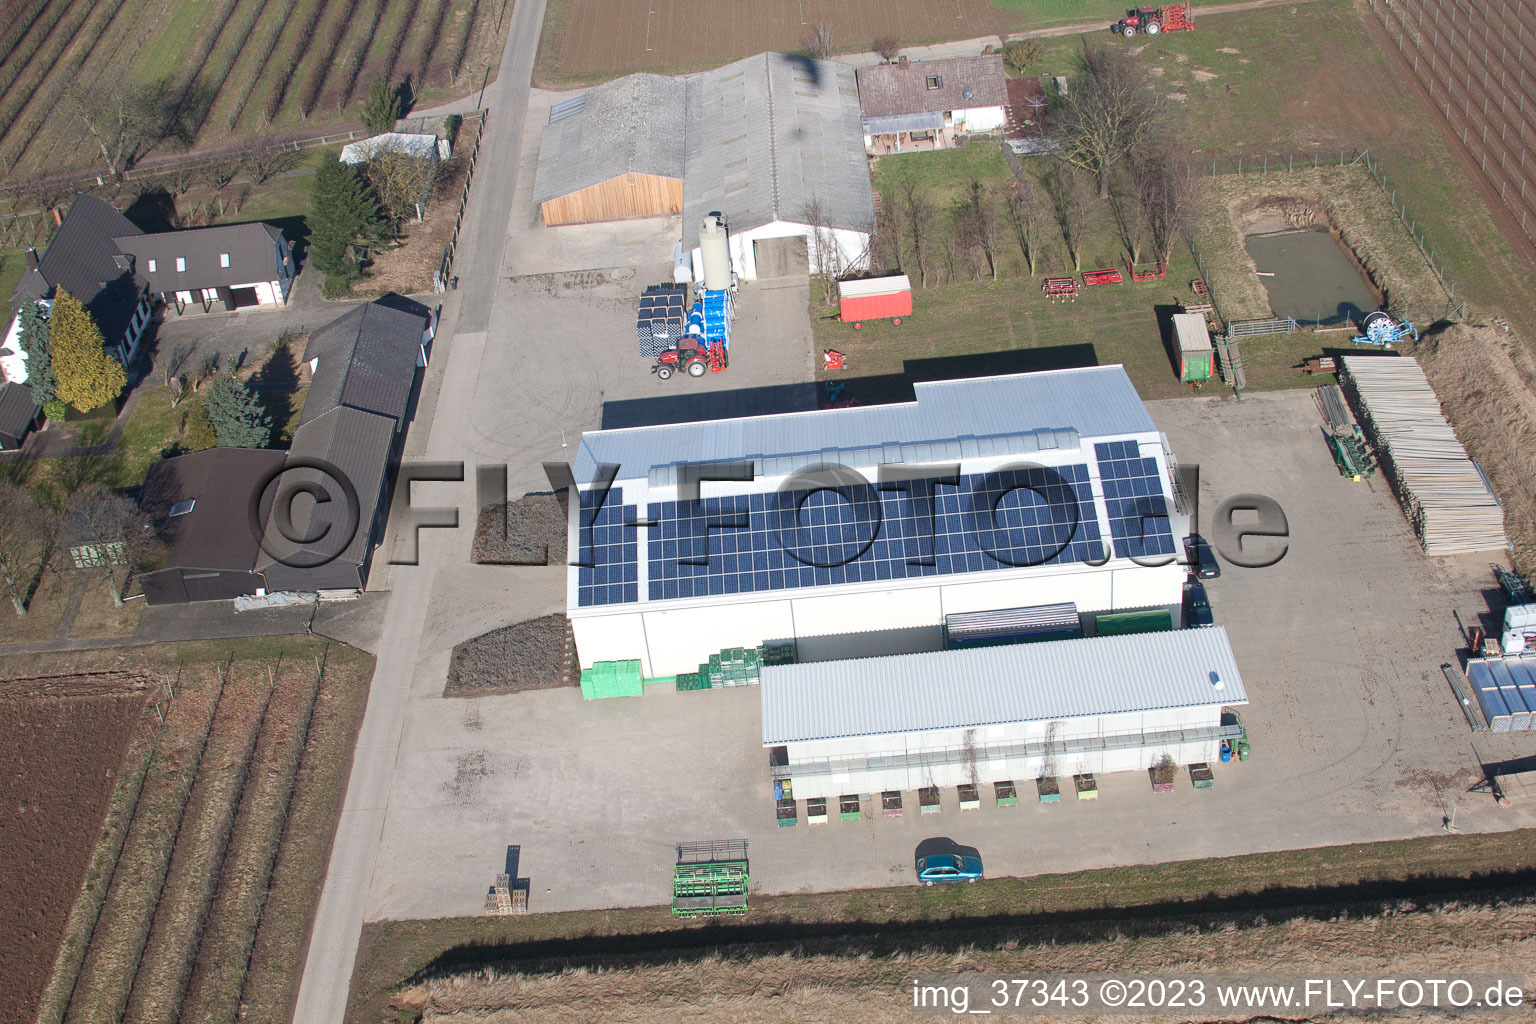 Aerial photograpy of Farmer's garden in Winden in the state Rhineland-Palatinate, Germany